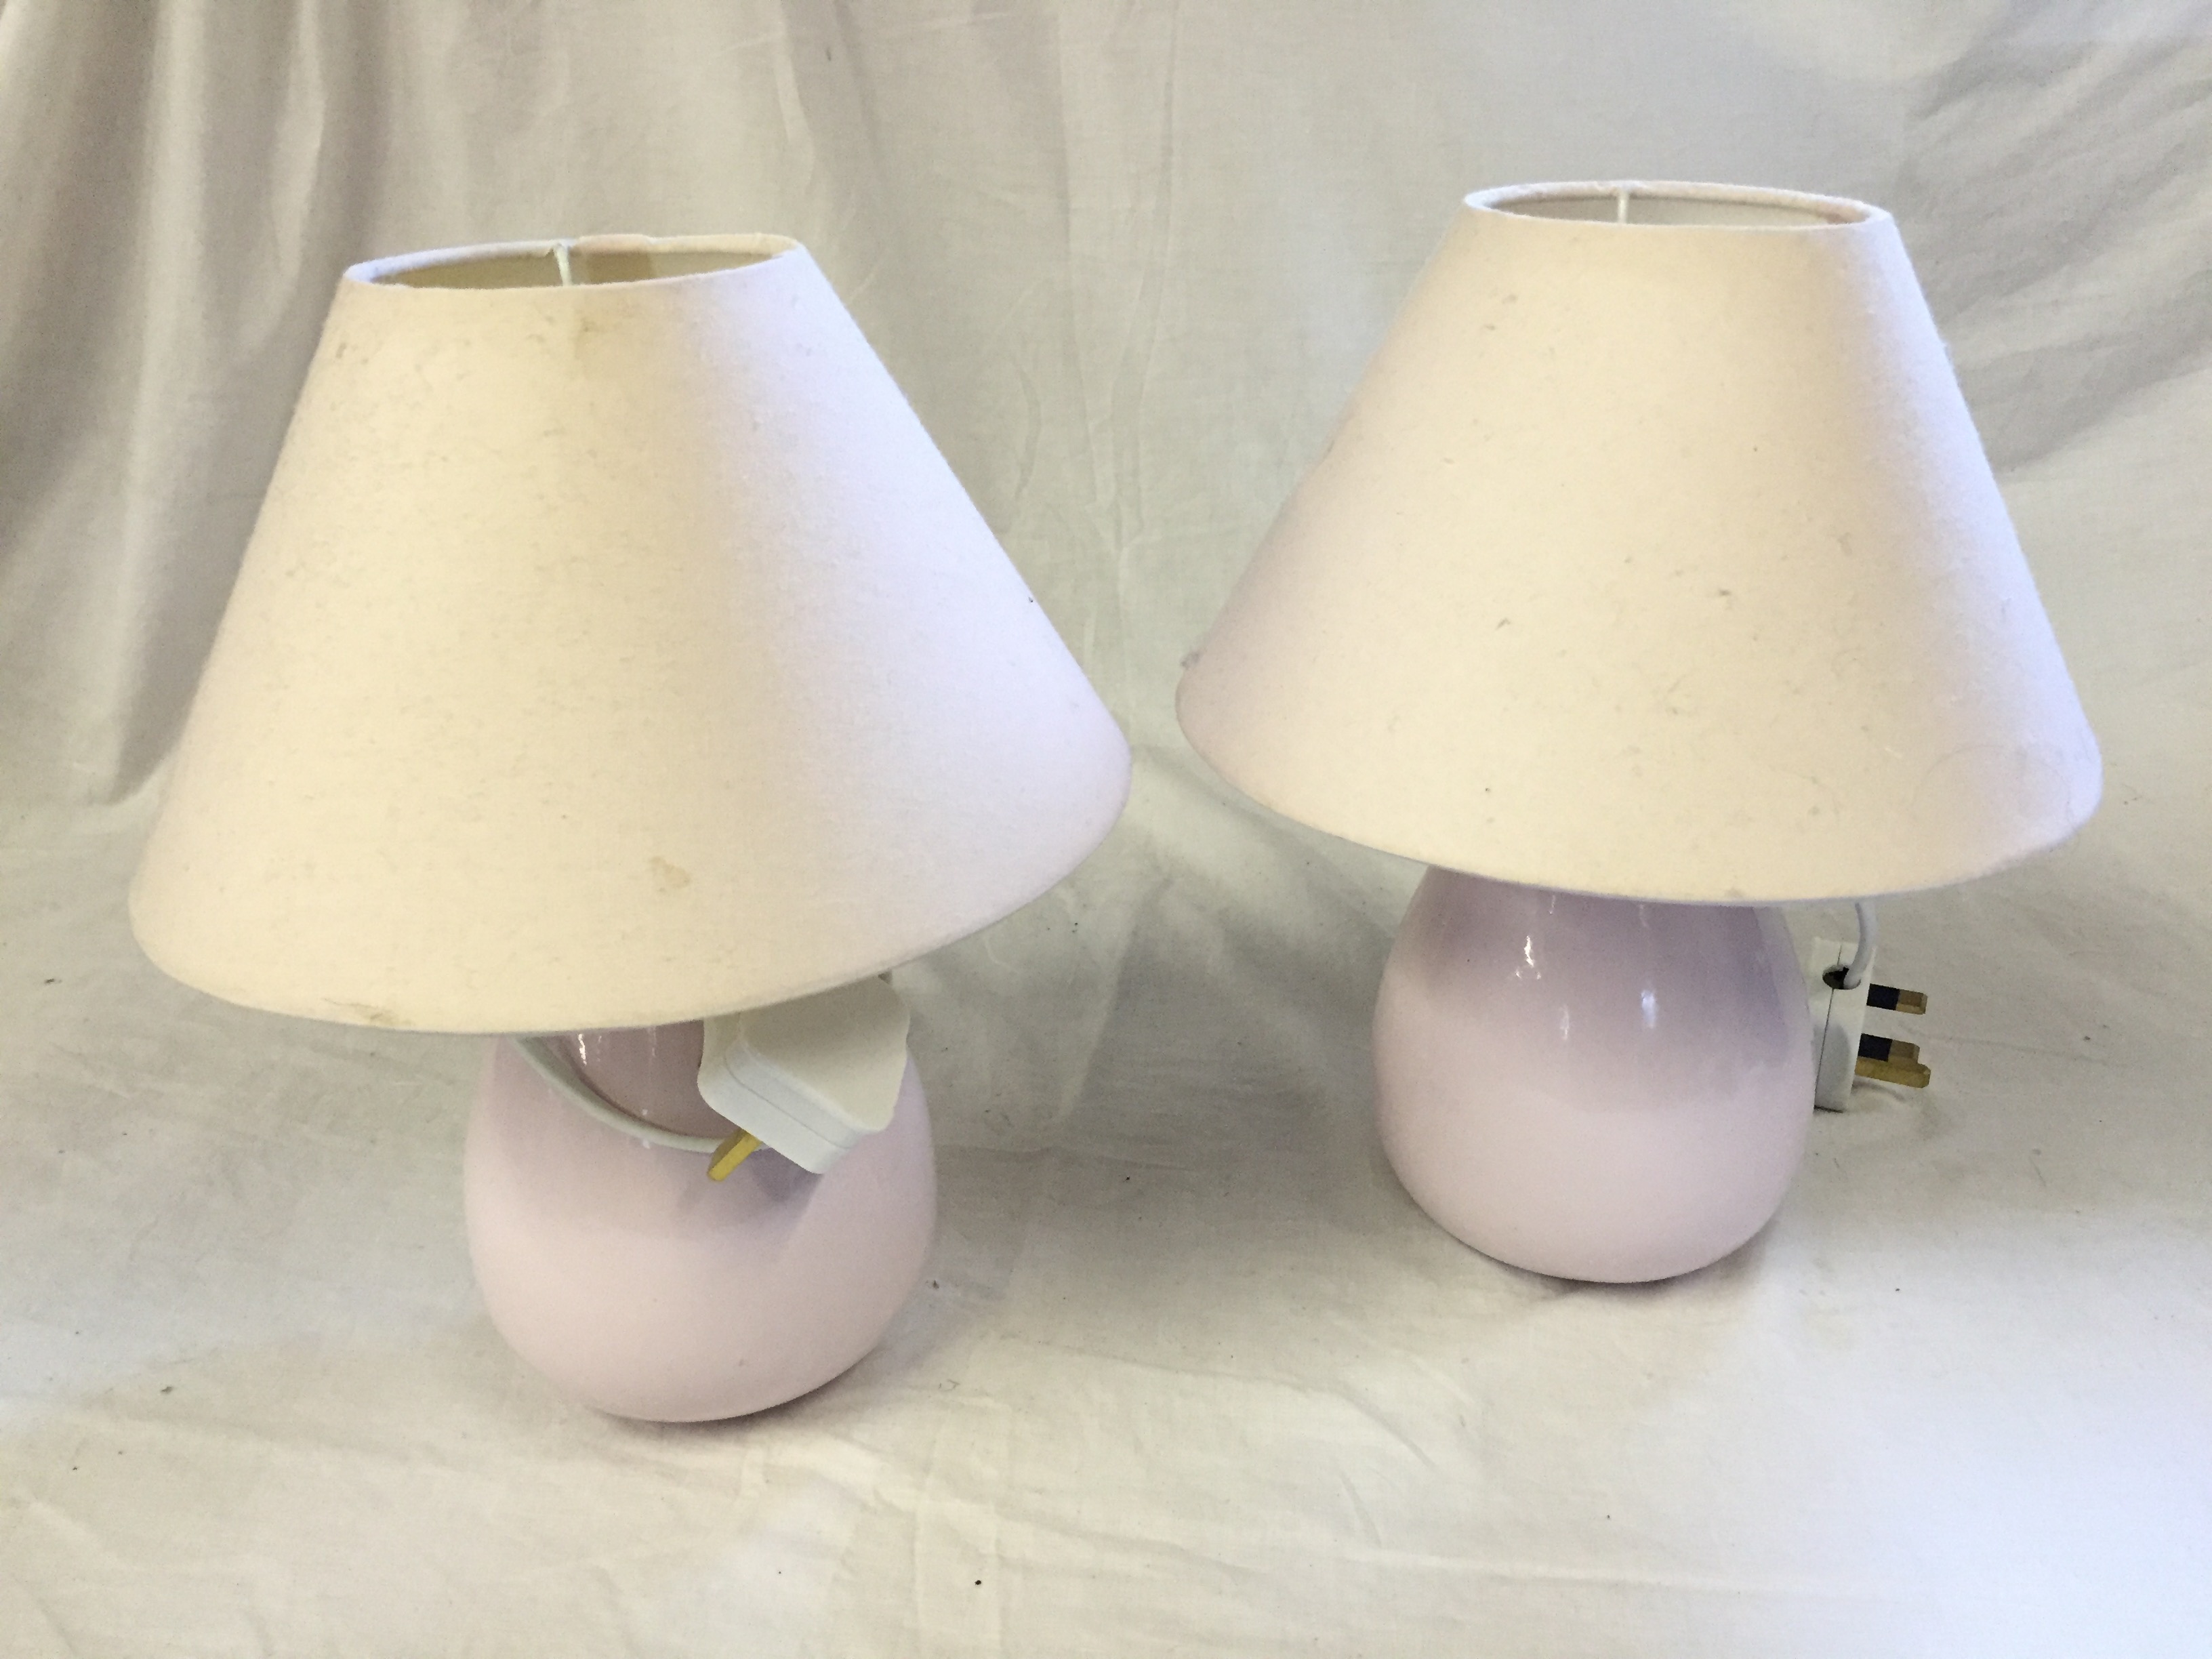 A pair of bedside lamps.